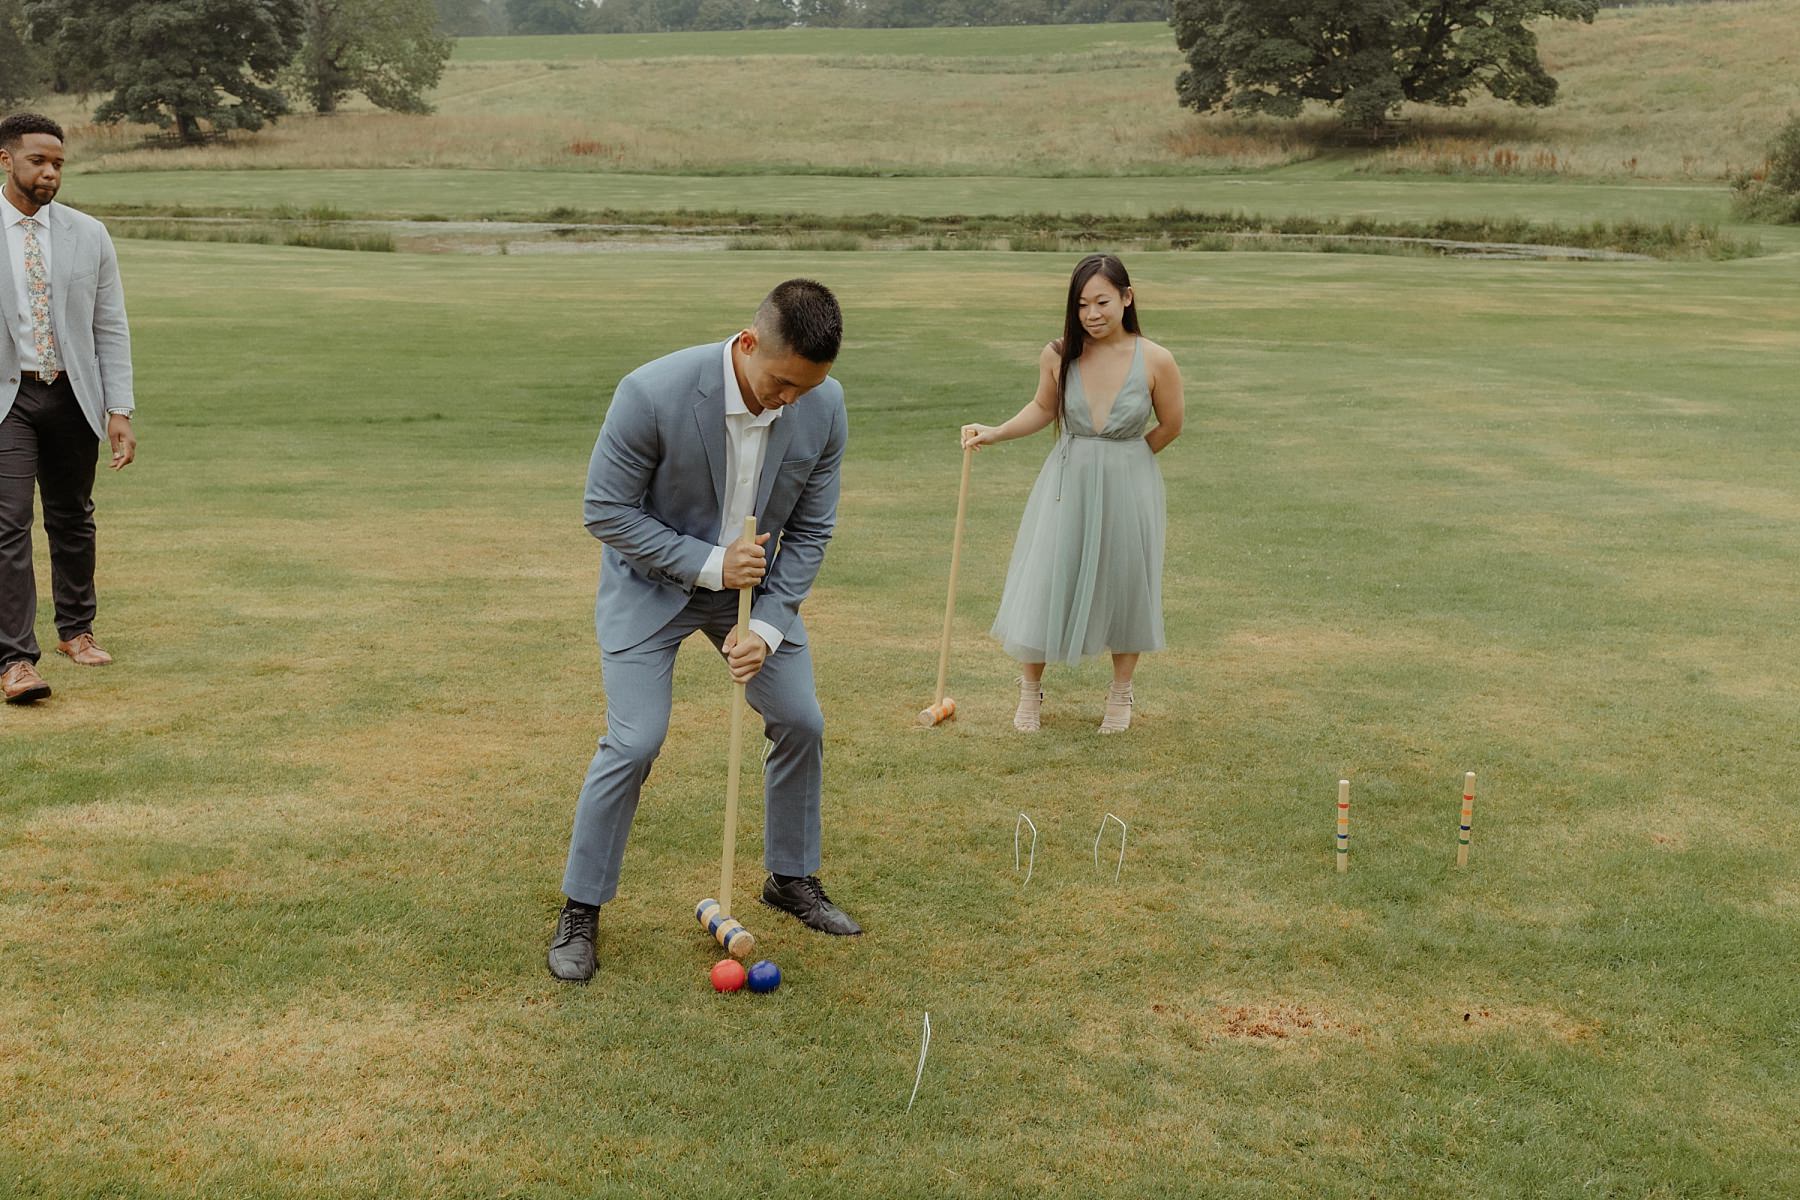 croquet and lawn games at cluny castle wedding scotland